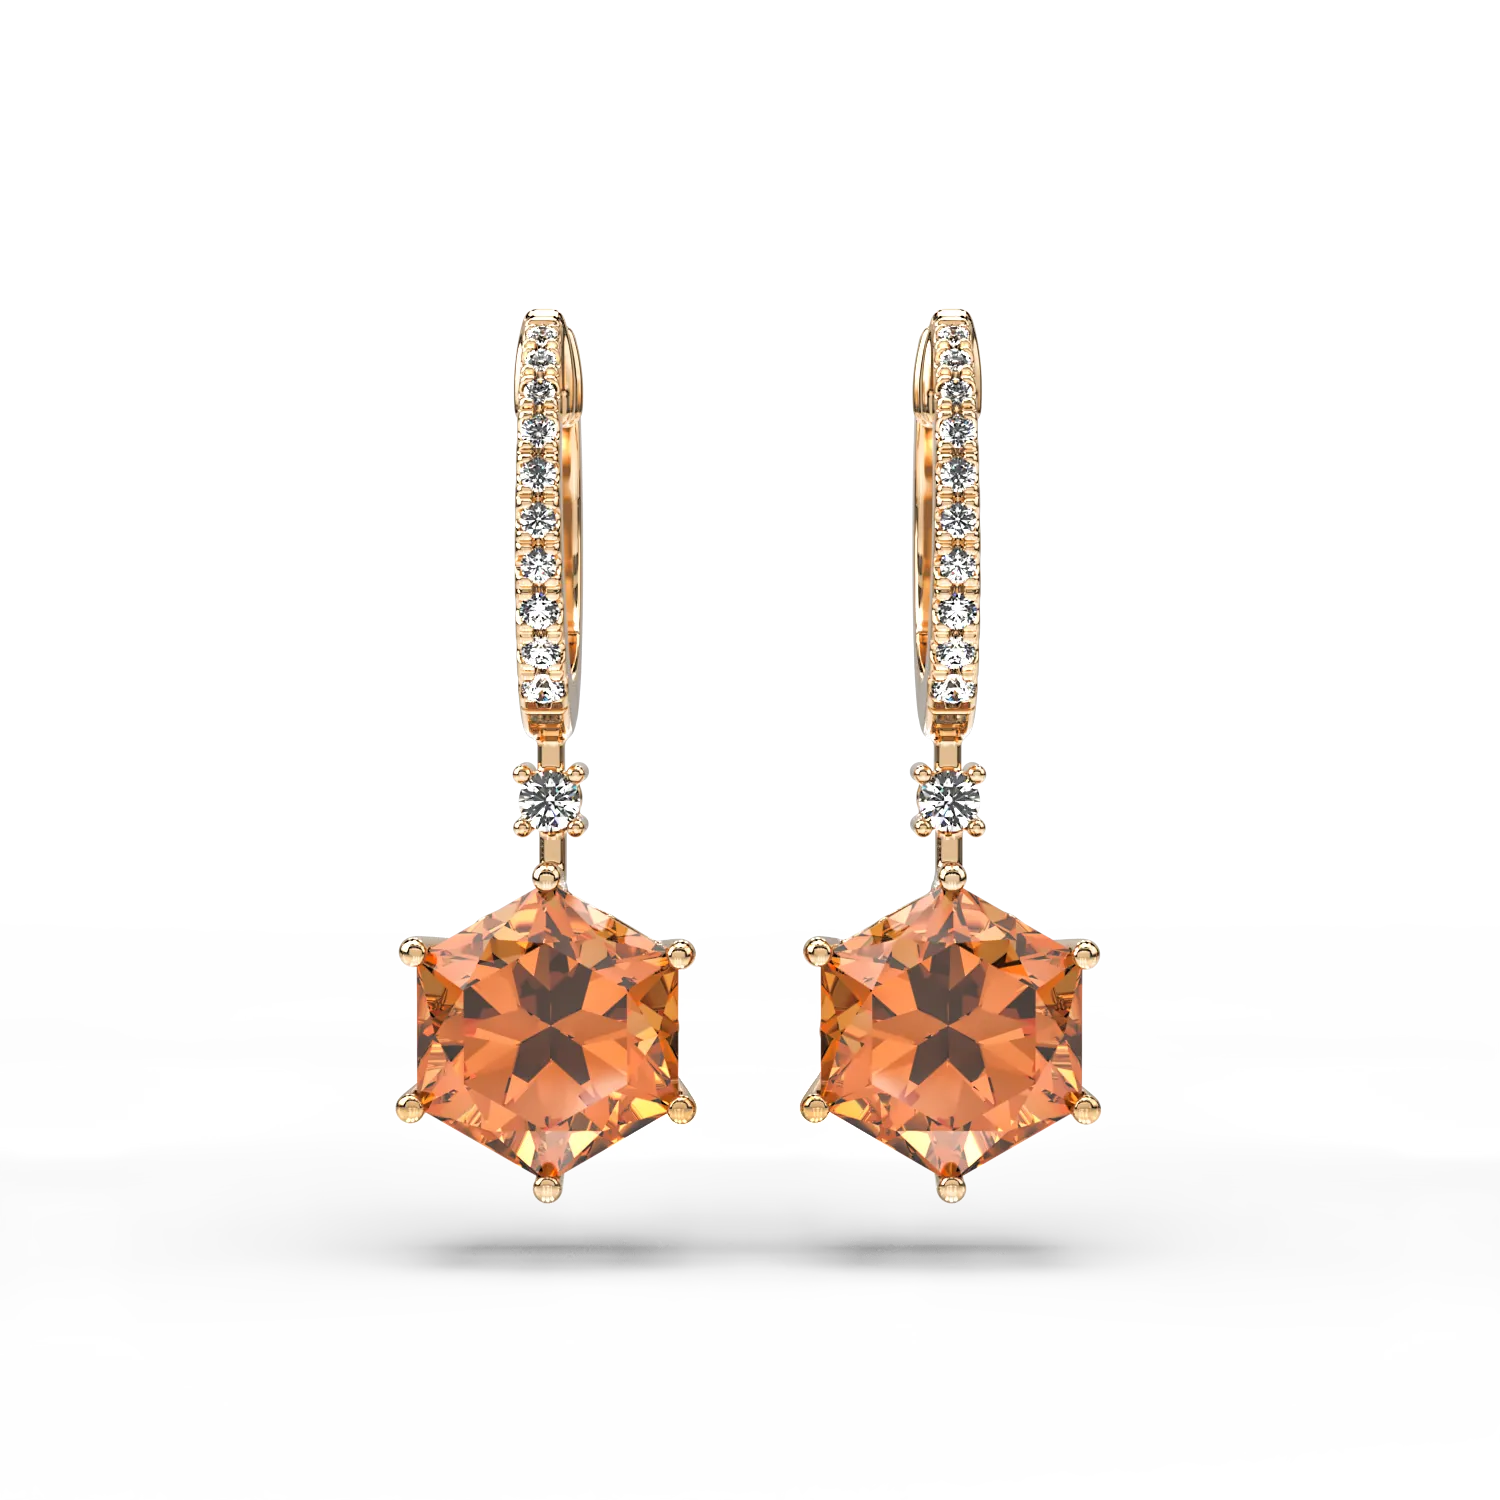 18K yellow gold earrings with 6.6ct citrine and 0.18ct diamonds